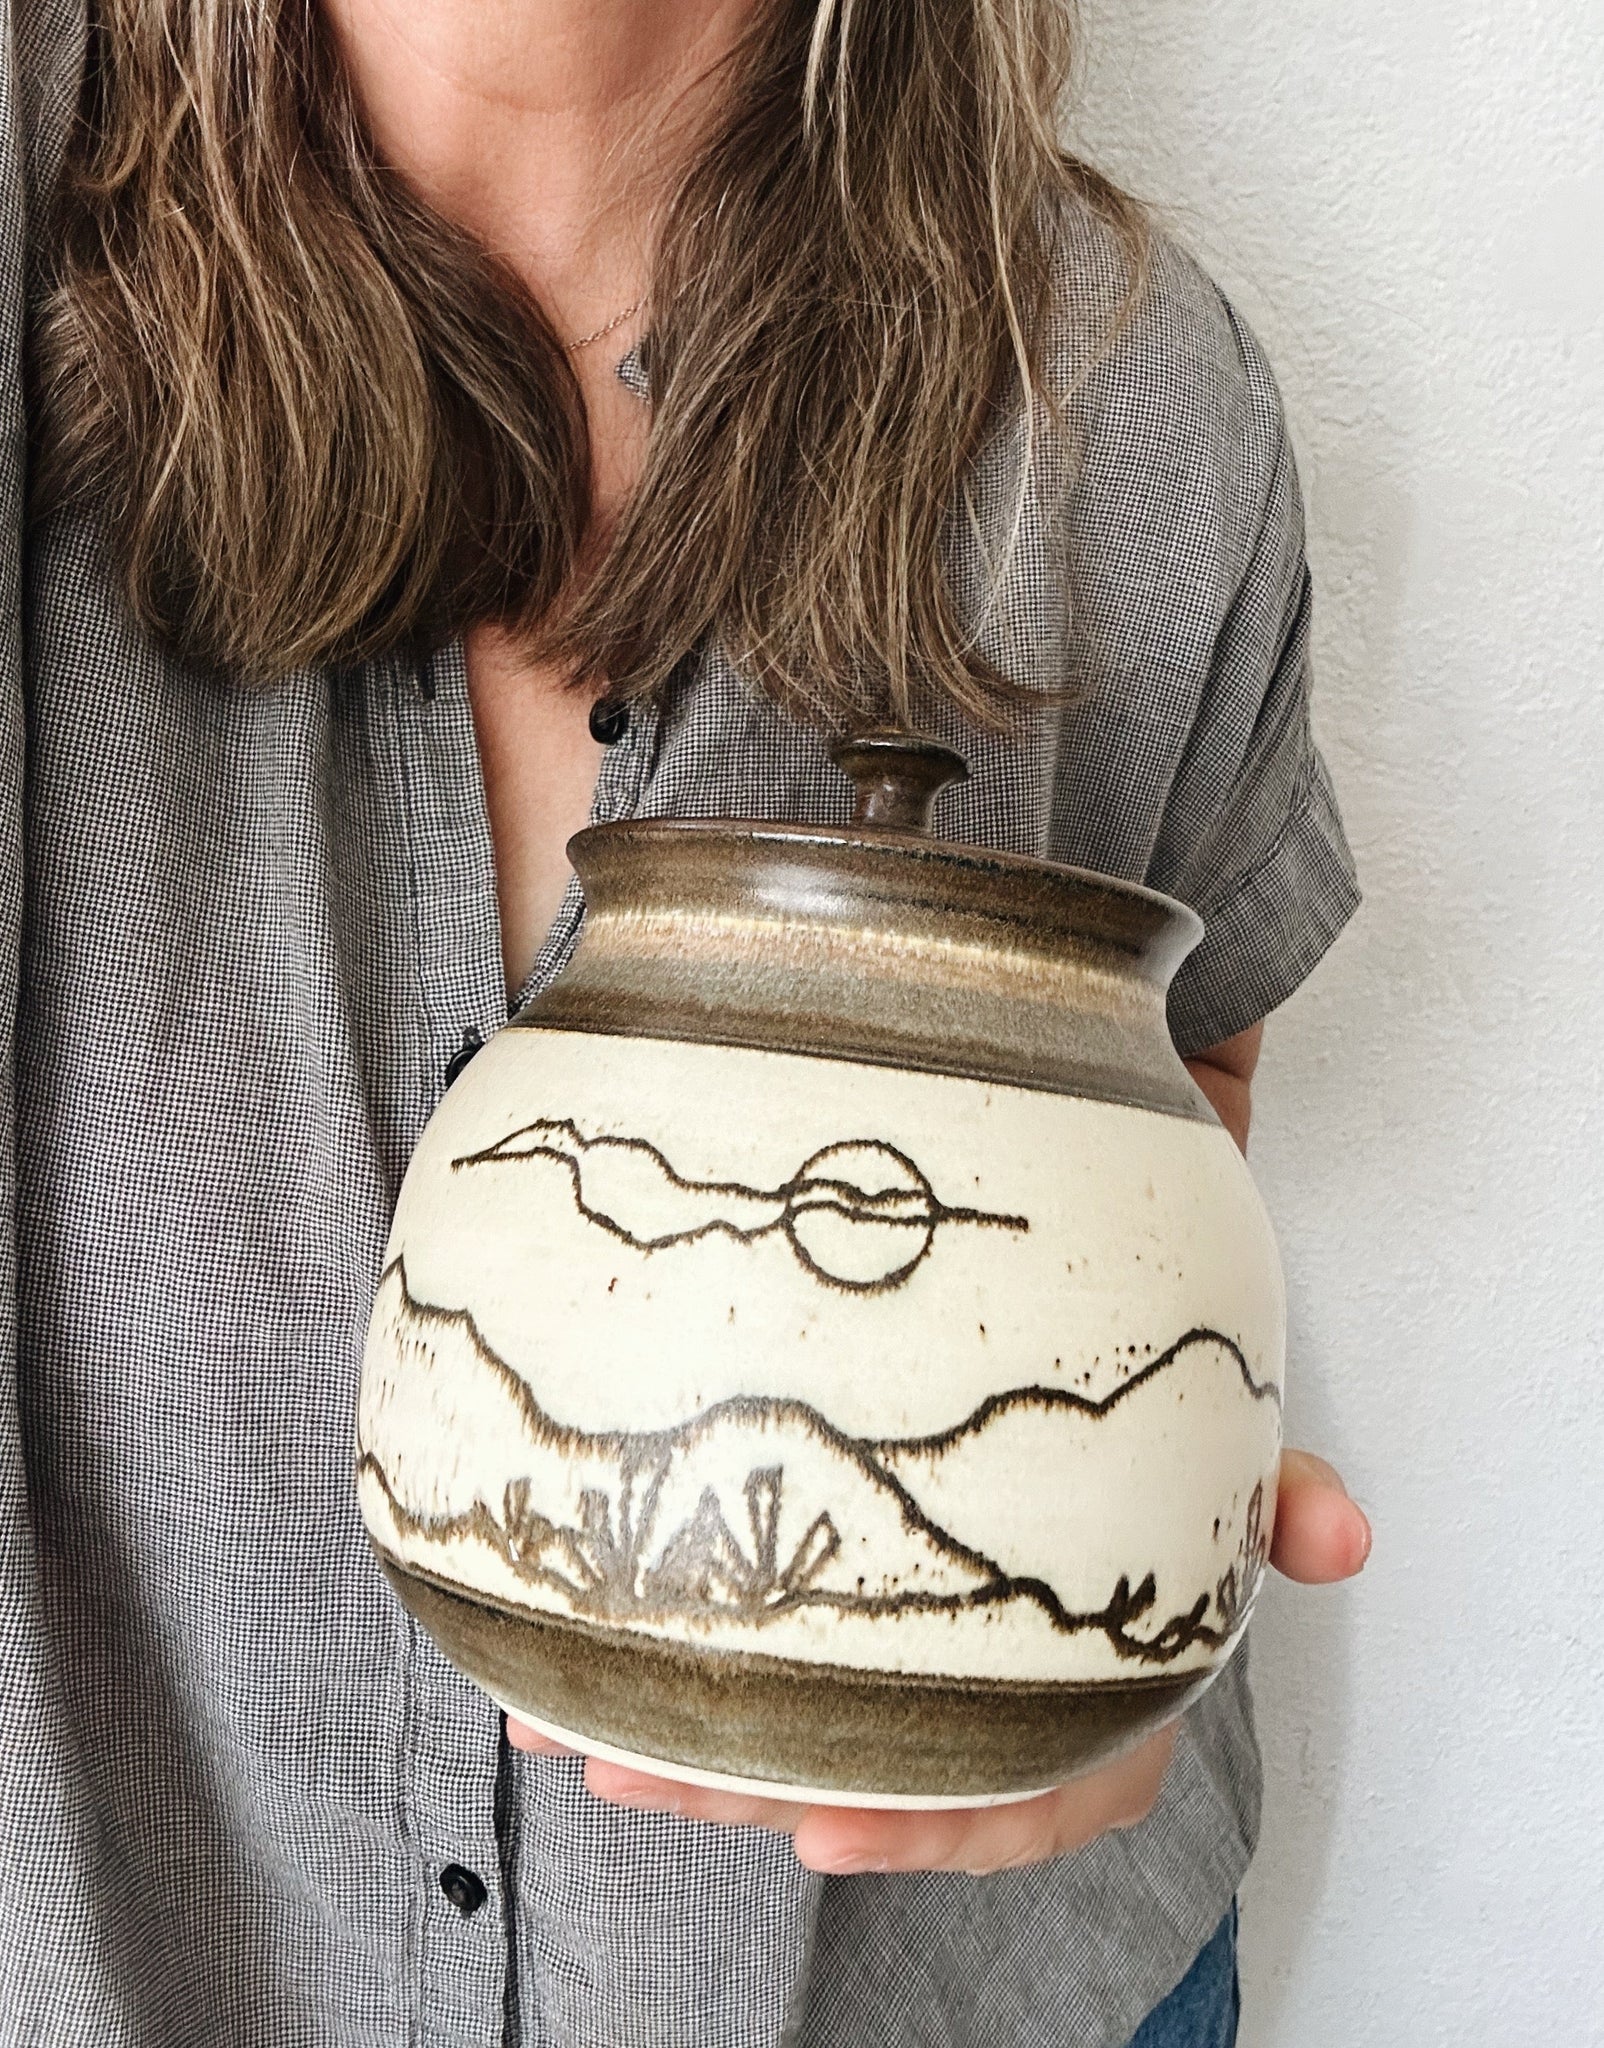 Lidded Pottery Canister